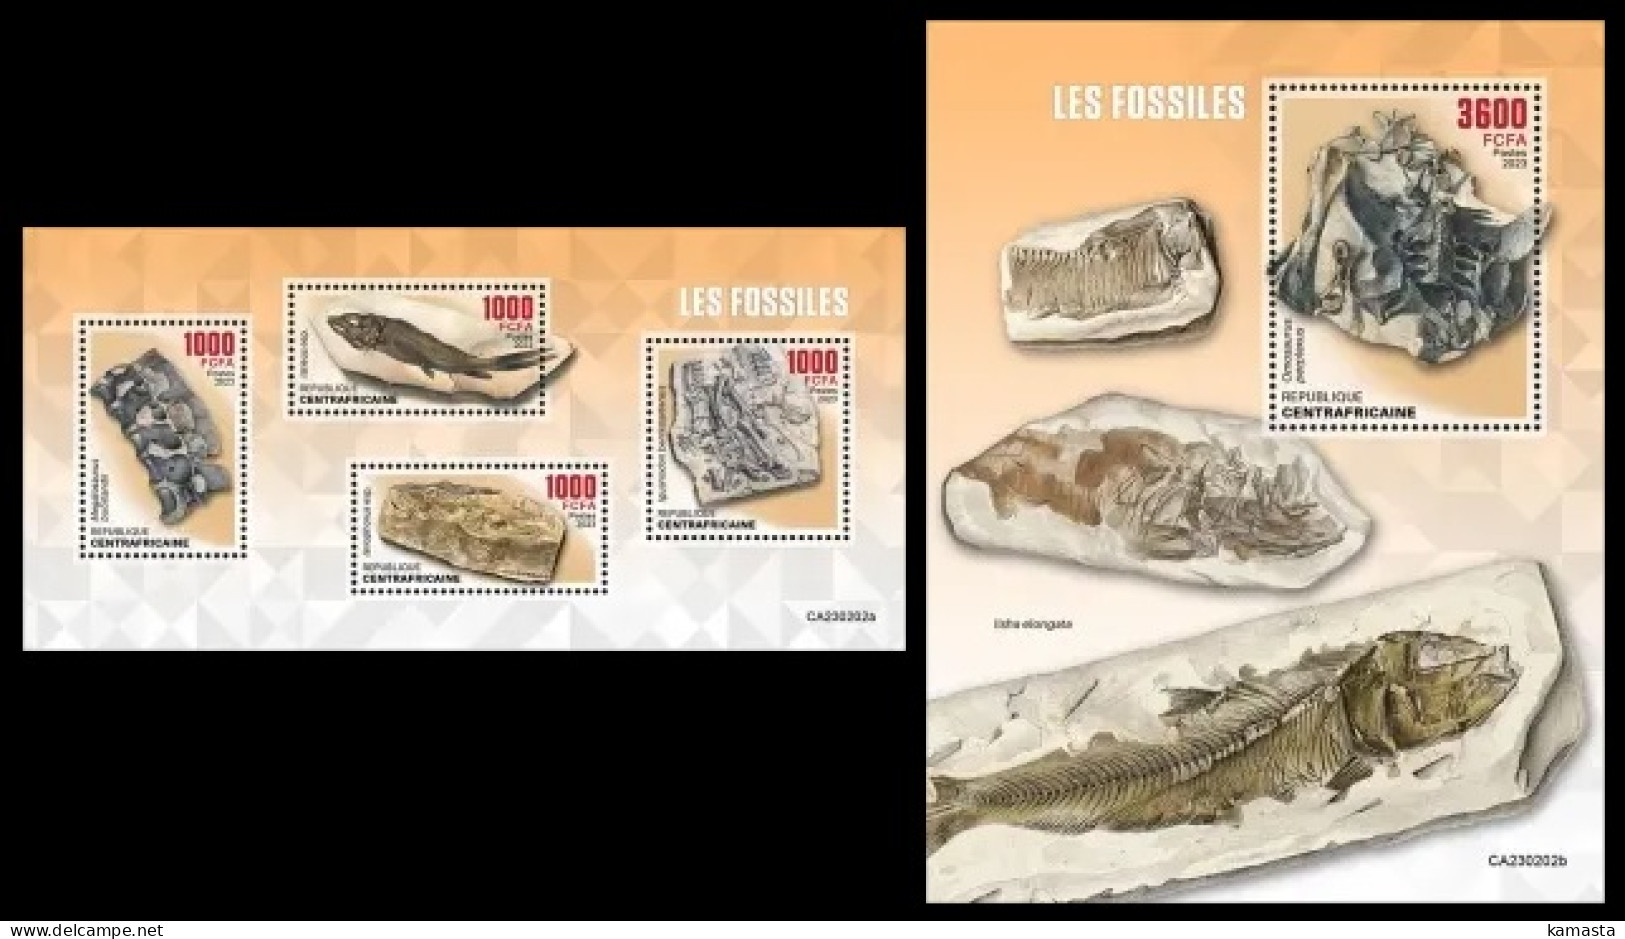 Central Africa 2023 Fossils. (202) OFFICIAL ISSUE - Fossili